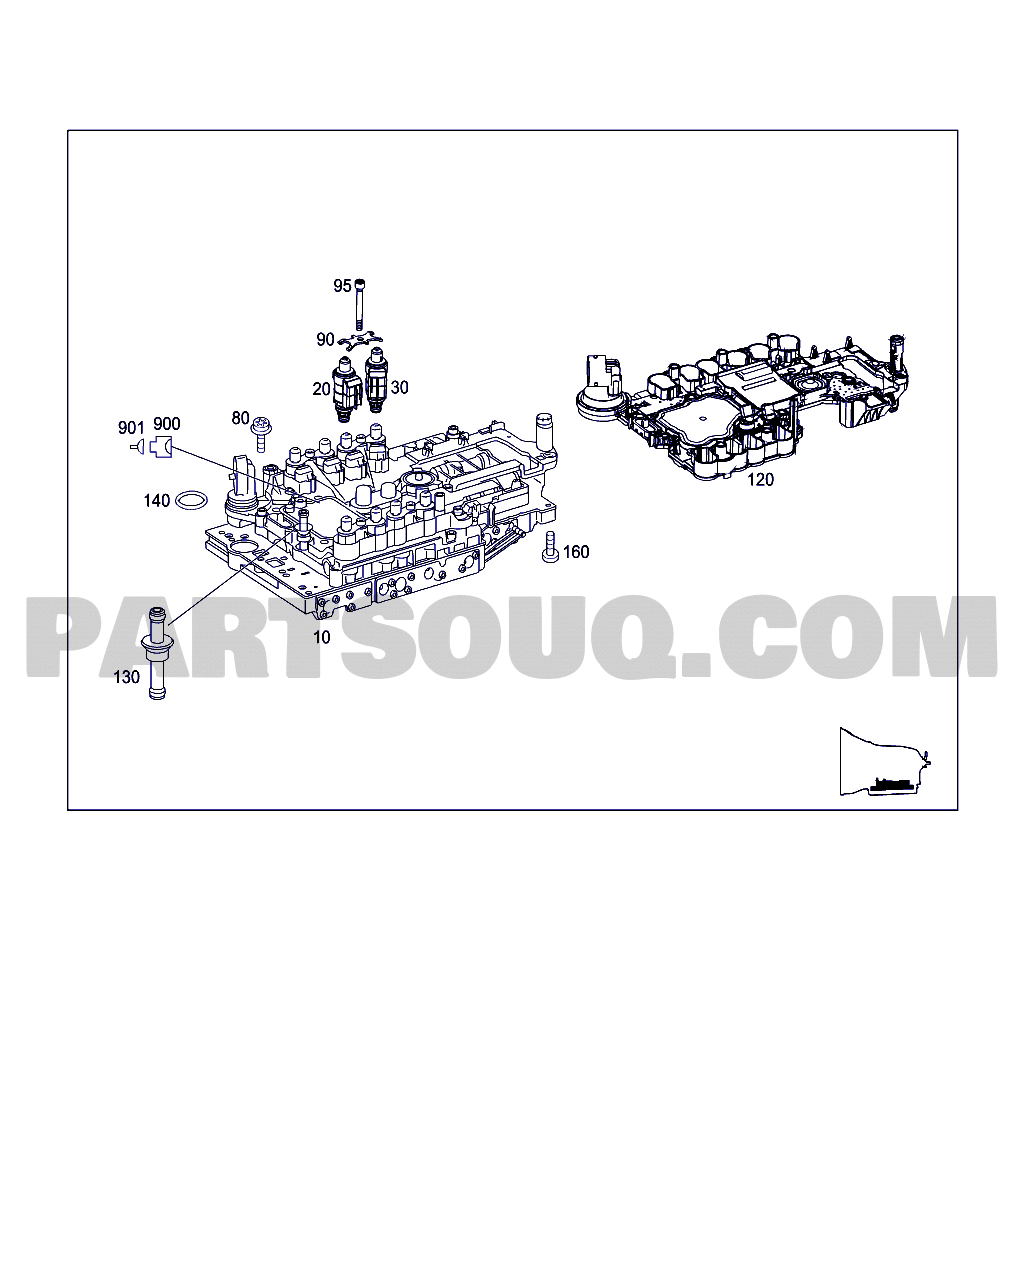 ELECTRICAL EQUIPMENT AND INSTRUMENTS, Mercedes-Benz E 250 CDI 4MATIC  WDD2120821A914740 WDDHF8CB0EA914740, Parts Catalogs